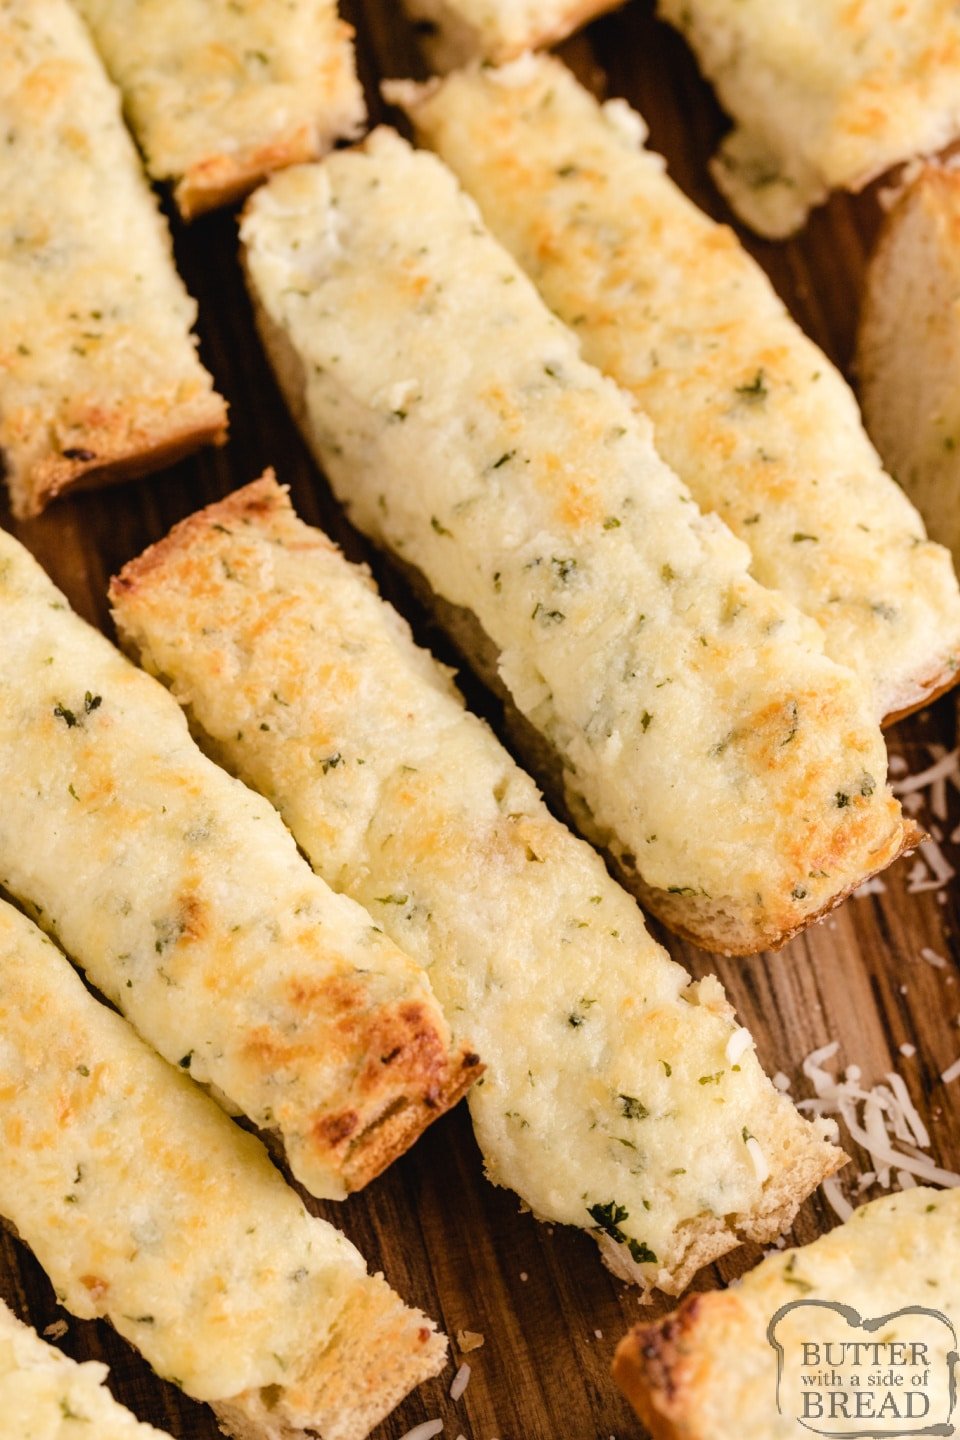 Easy Cheesy Garlic Bread is loaded with butter, cream cheese, garlic, parsley and mozzarella- it's the perfect side dish for every Italian meal! Perfectly seasoned and loaded with cheese, this garlic bread recipe can be made and served in under 10 minutes! 